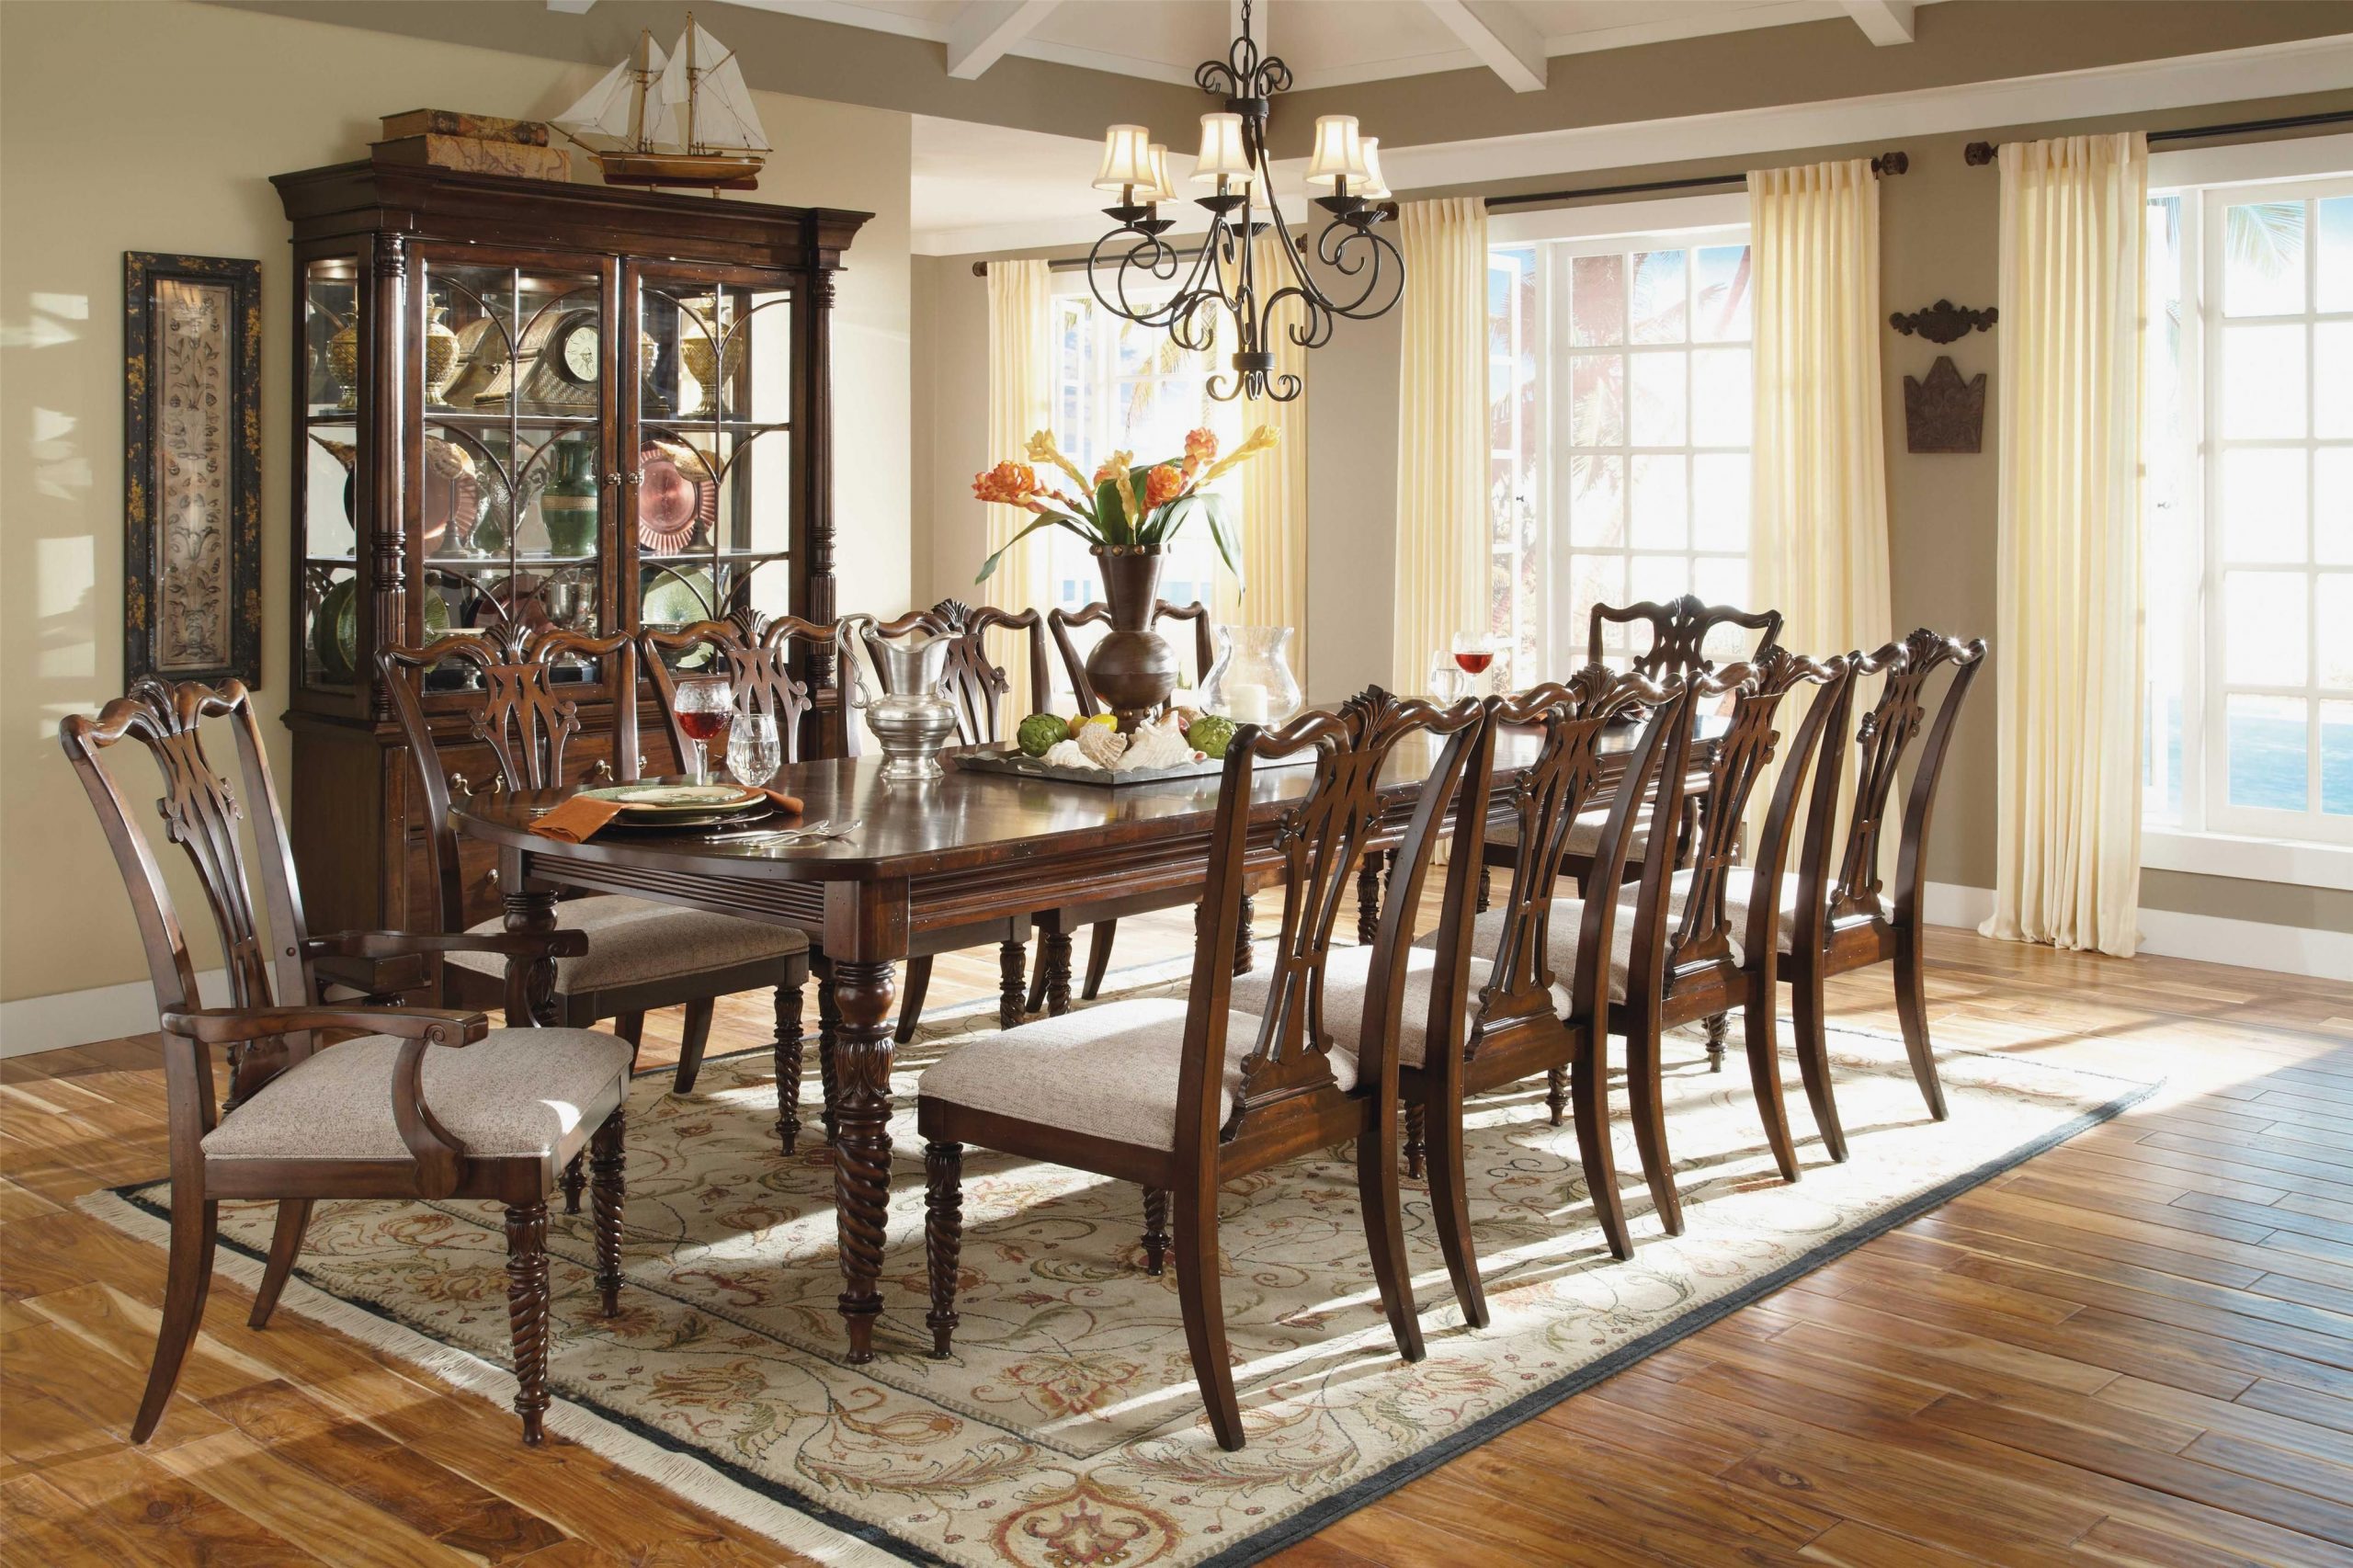 Dining Room French Country Sets Wood Table For 10 Formal in sizing 4000 X 2666